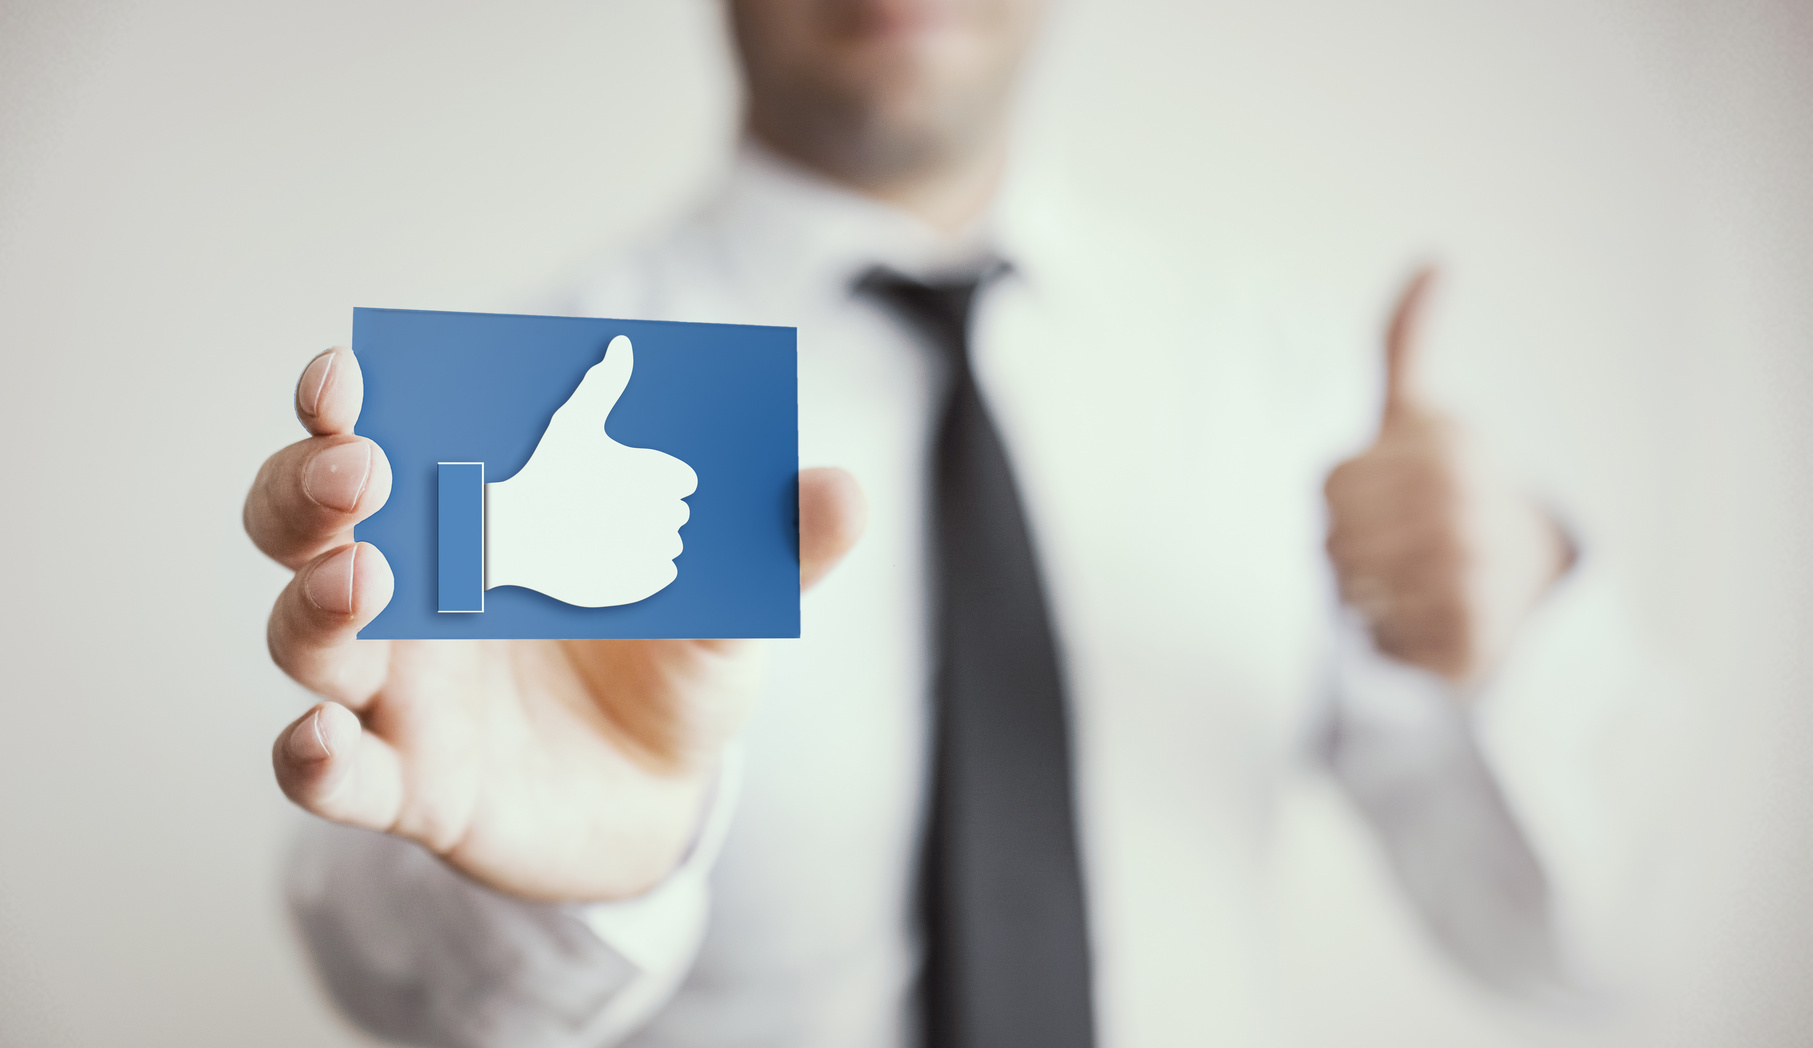 Facebook marketing content people crave